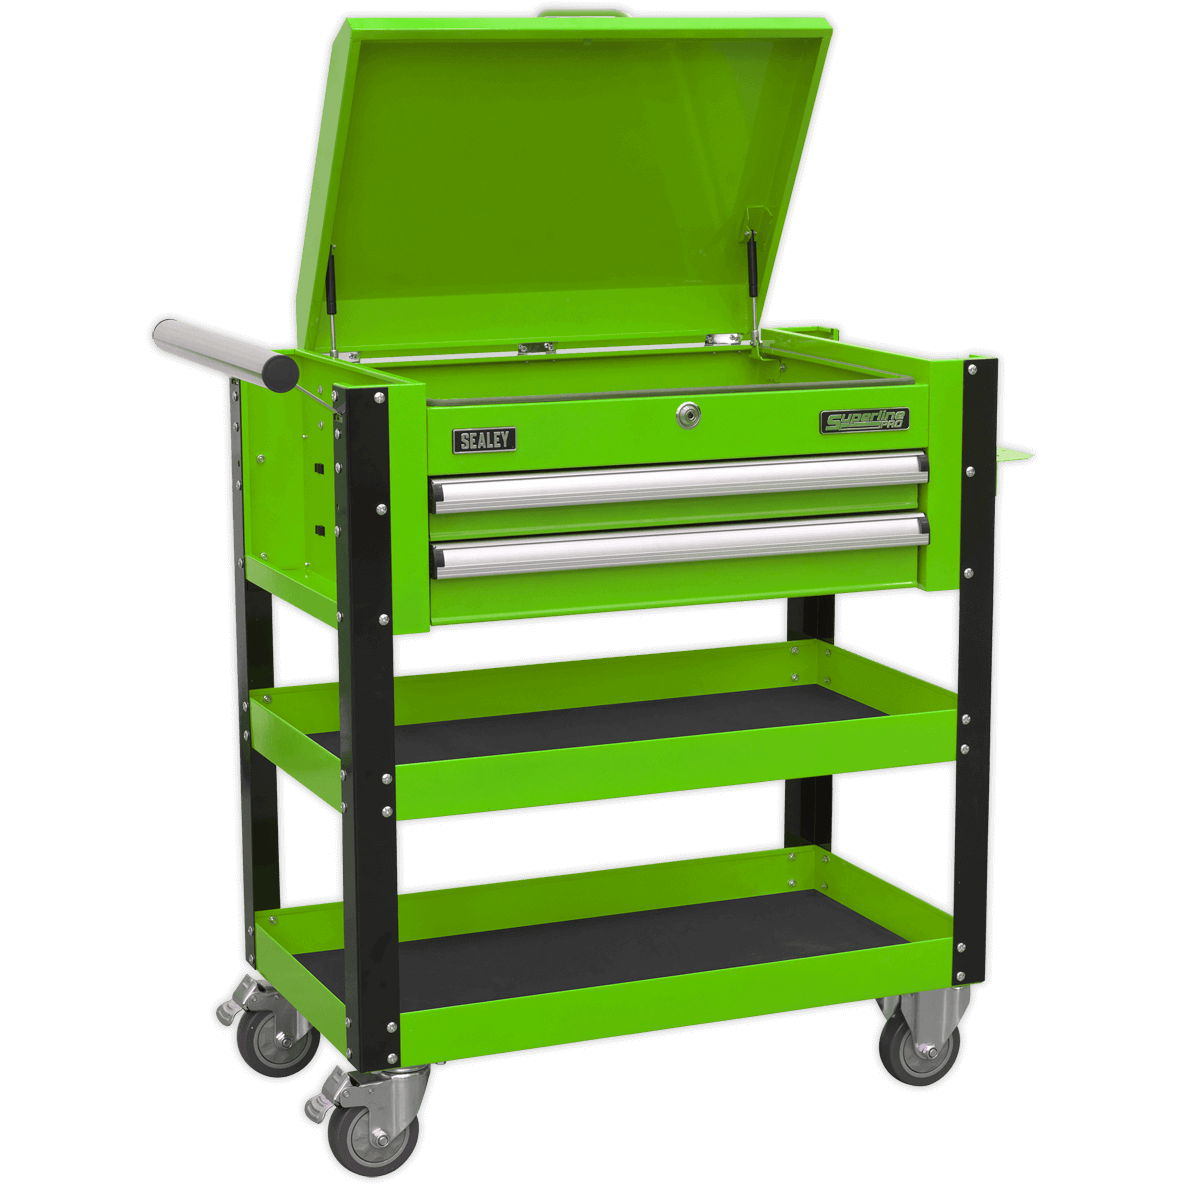 Sealey 2 Drawer Heavy Duty Mobile Tool and Parts Trolley Green & Black